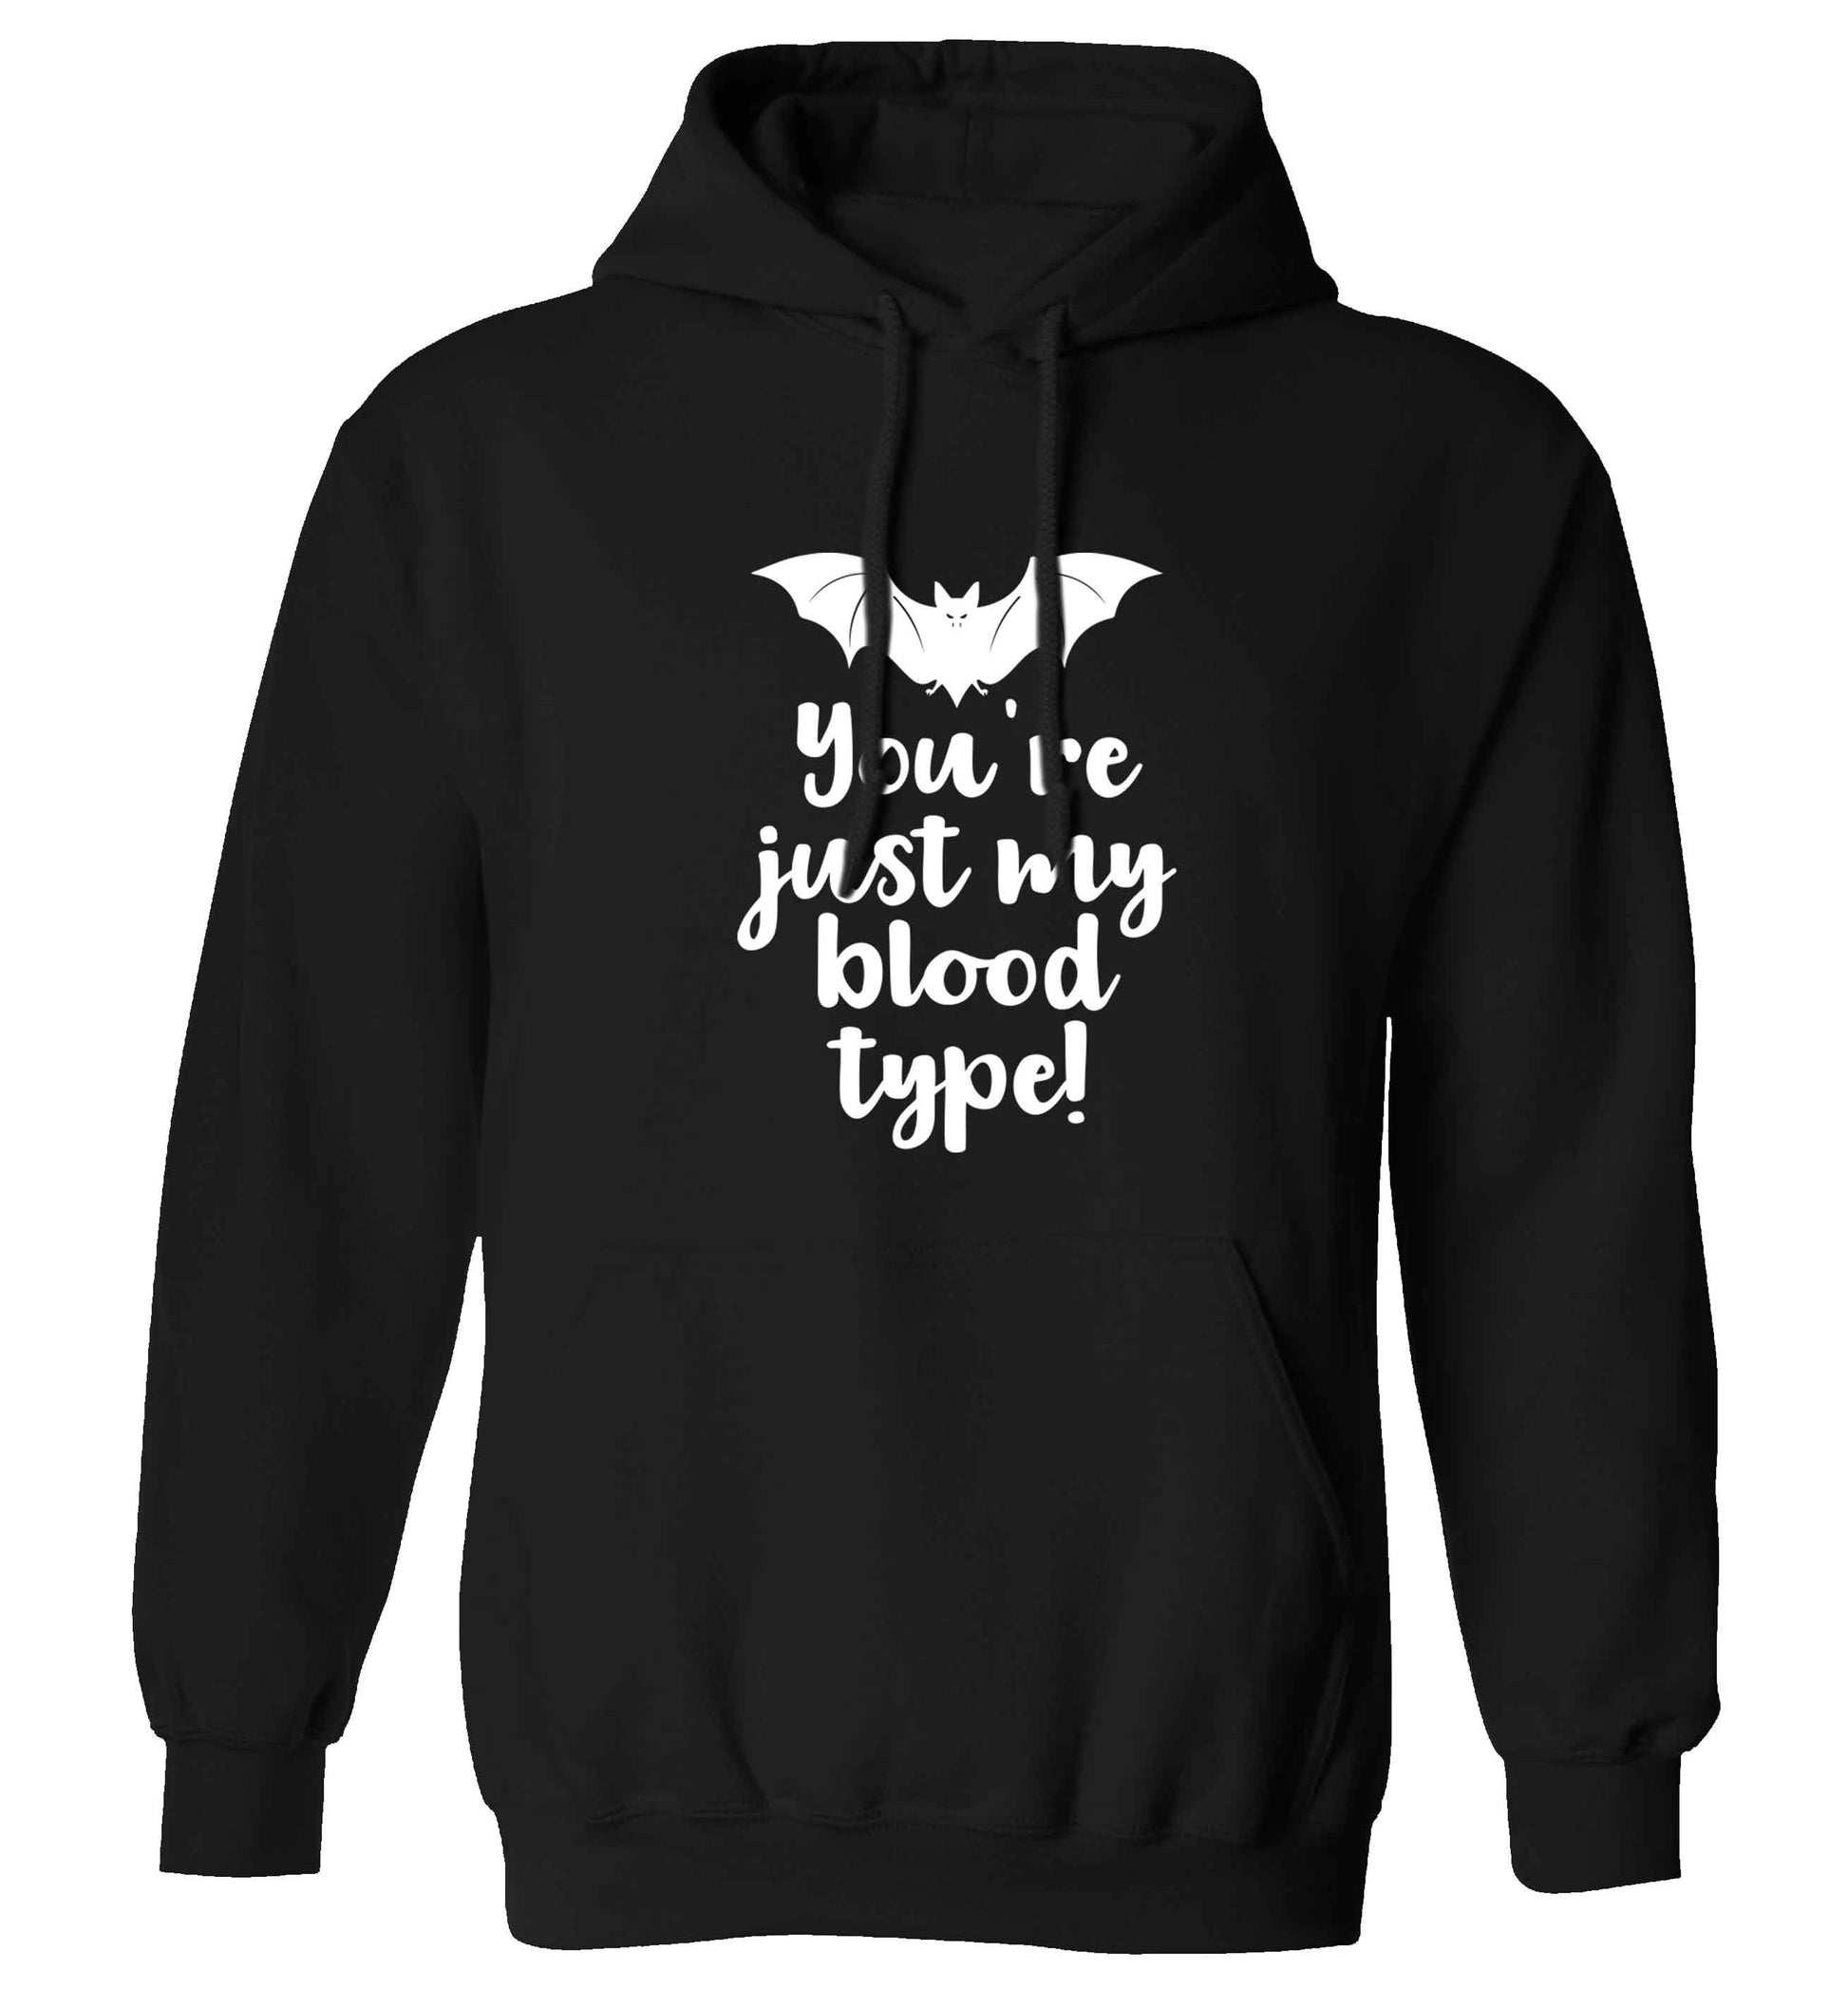 You're just my blood type adults unisex black hoodie 2XL